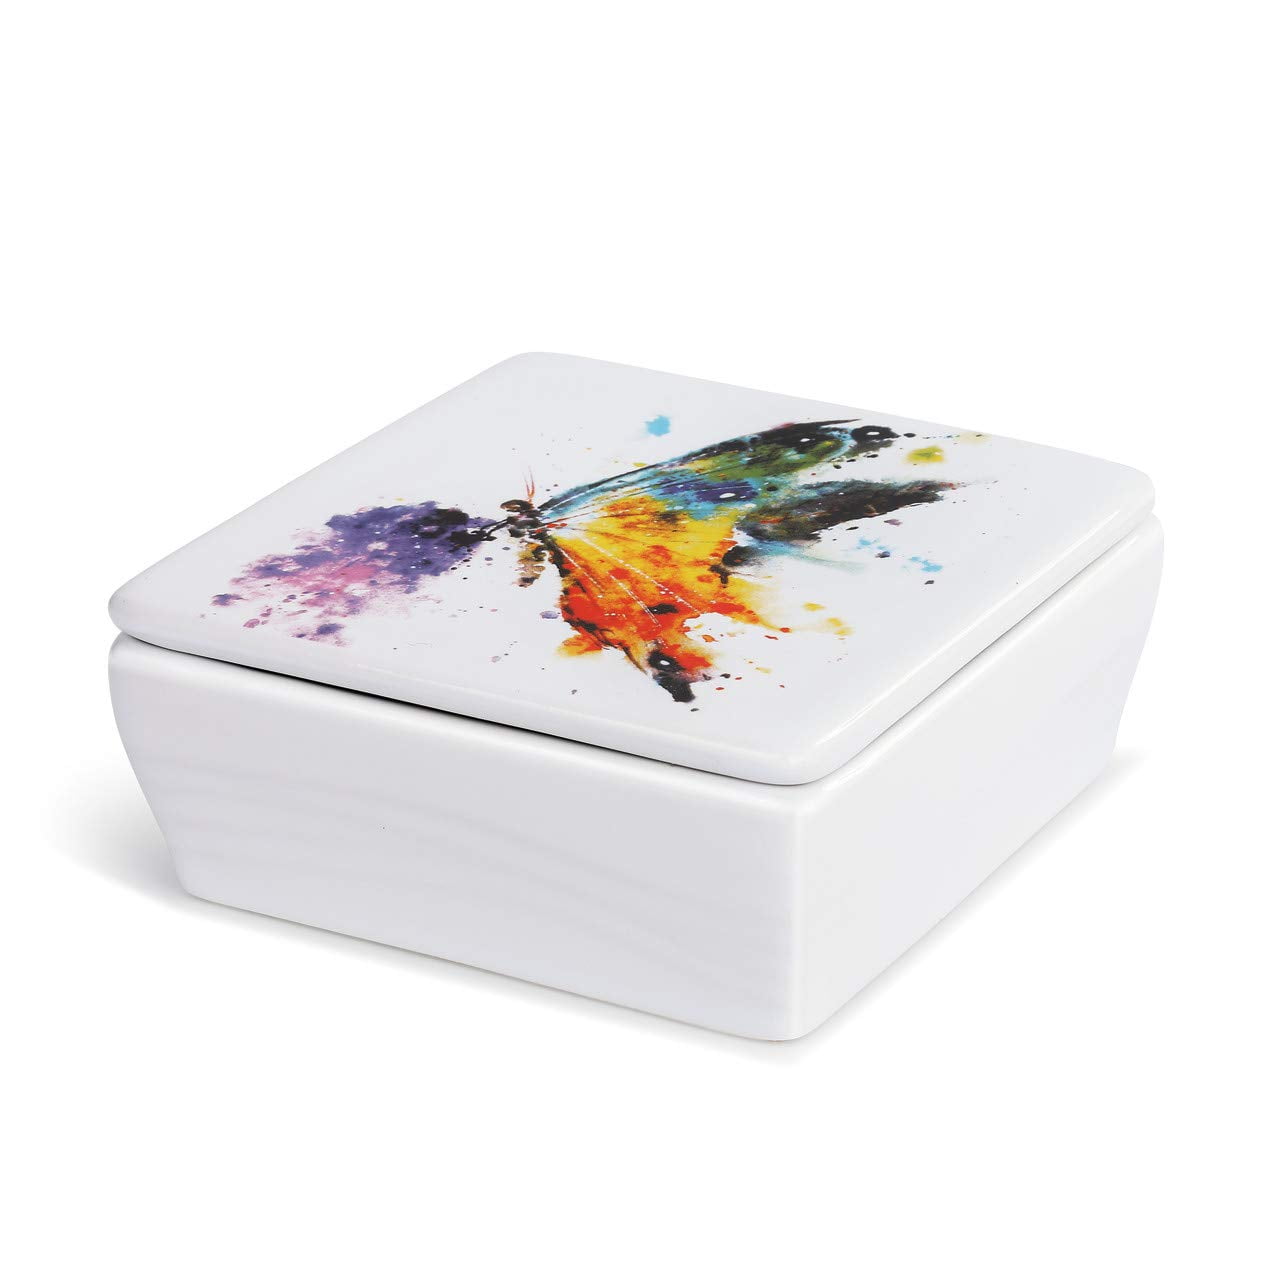 Details about   Dean Crouser Kaleidoscope Butterfly Watercolor Ceramic Stoneware Vanity Box 